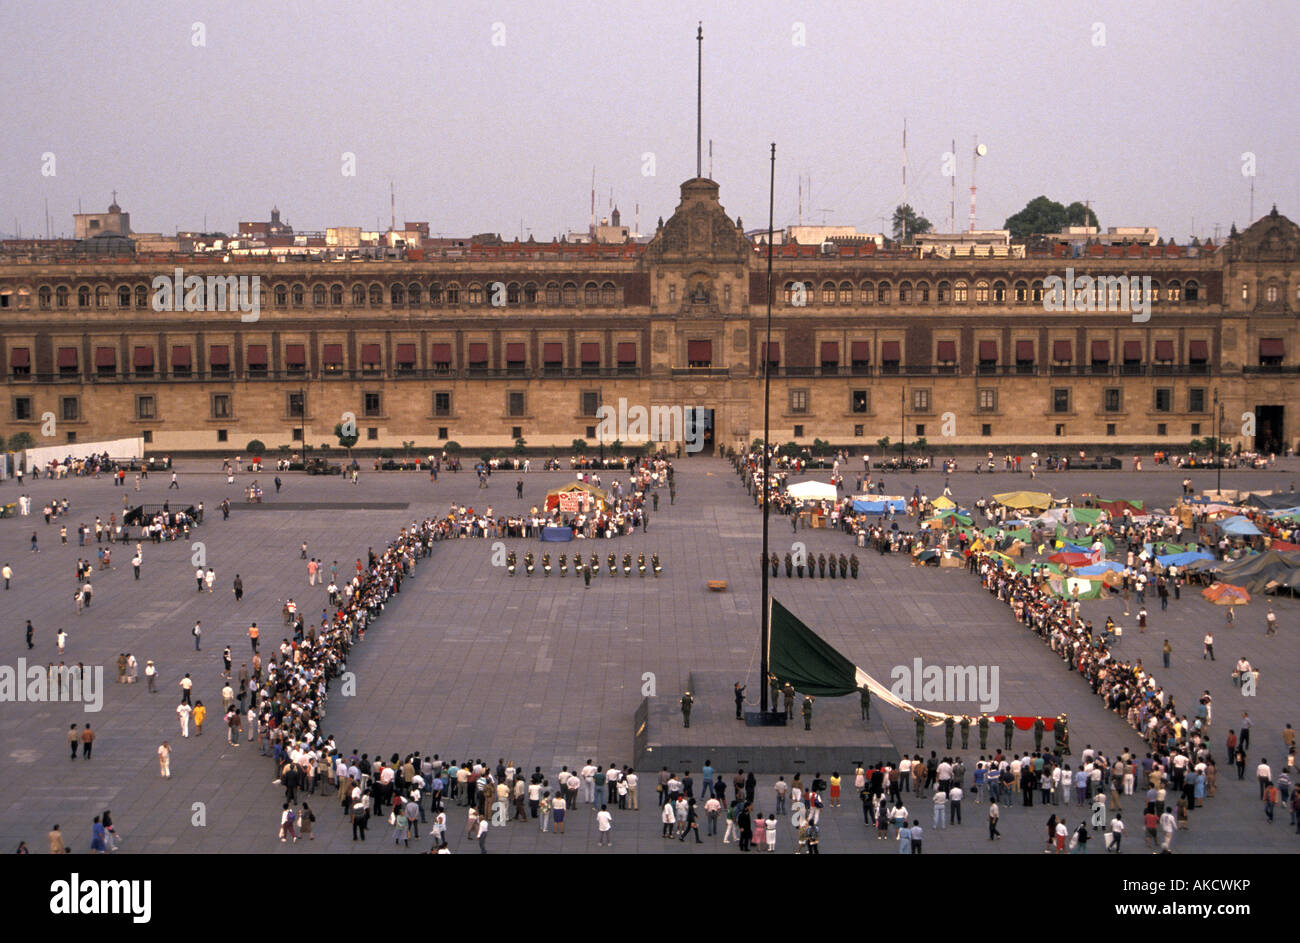 The daily flag lowering ceremony in the Zocalo, Mexico City, Mexico Stock Photo